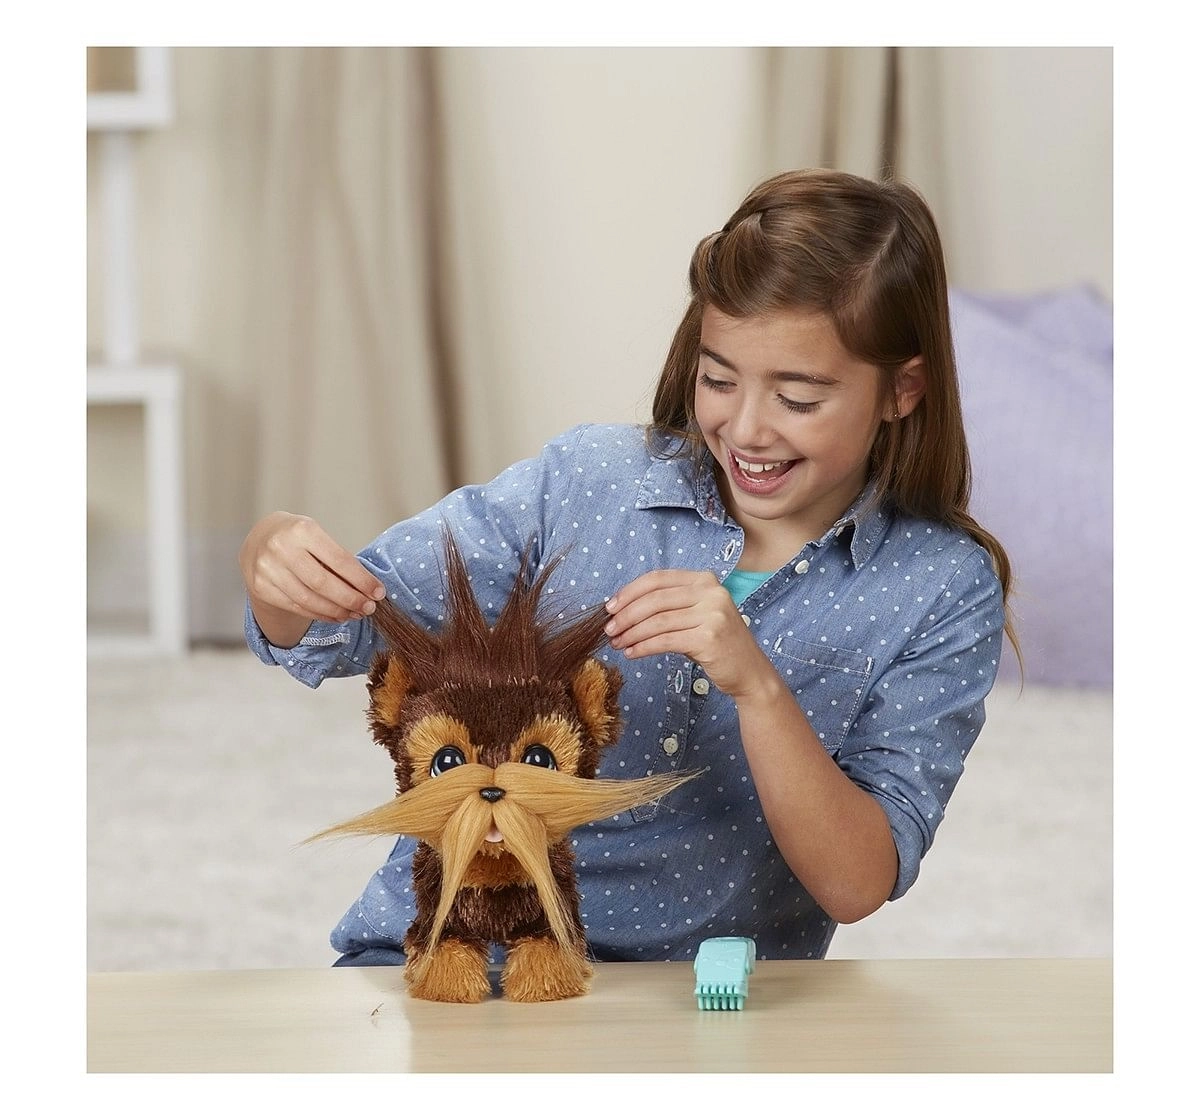 Furreal Shaggy Shawn  Interactive Soft Toys for age 4Y+ - 24.13 Cm 